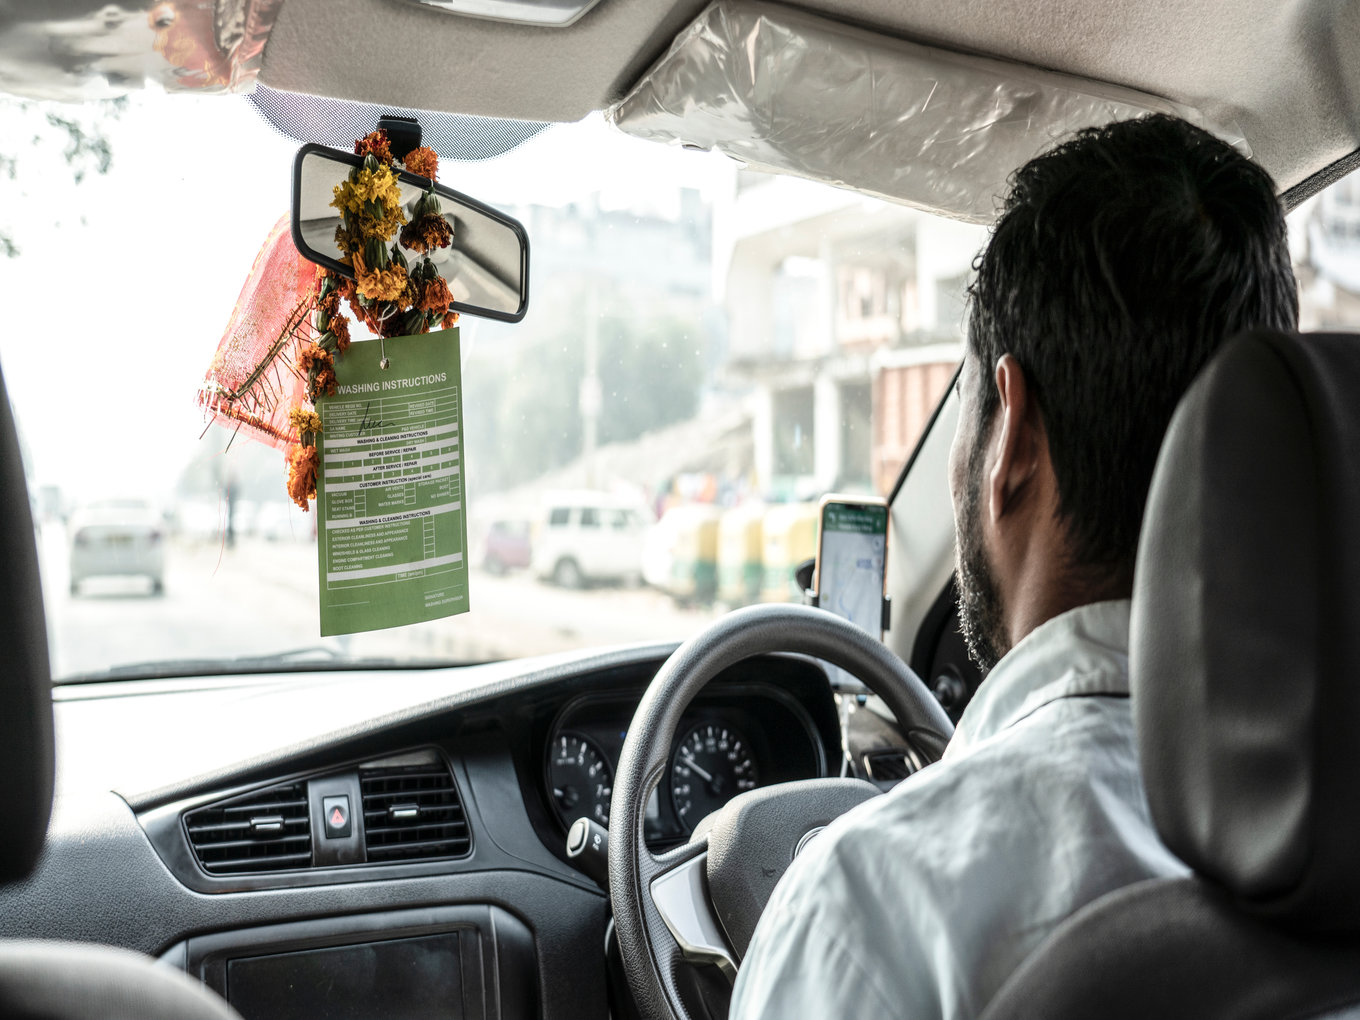 Are Ola, Uber In Danger Of #Logout Campaign From Drivers?